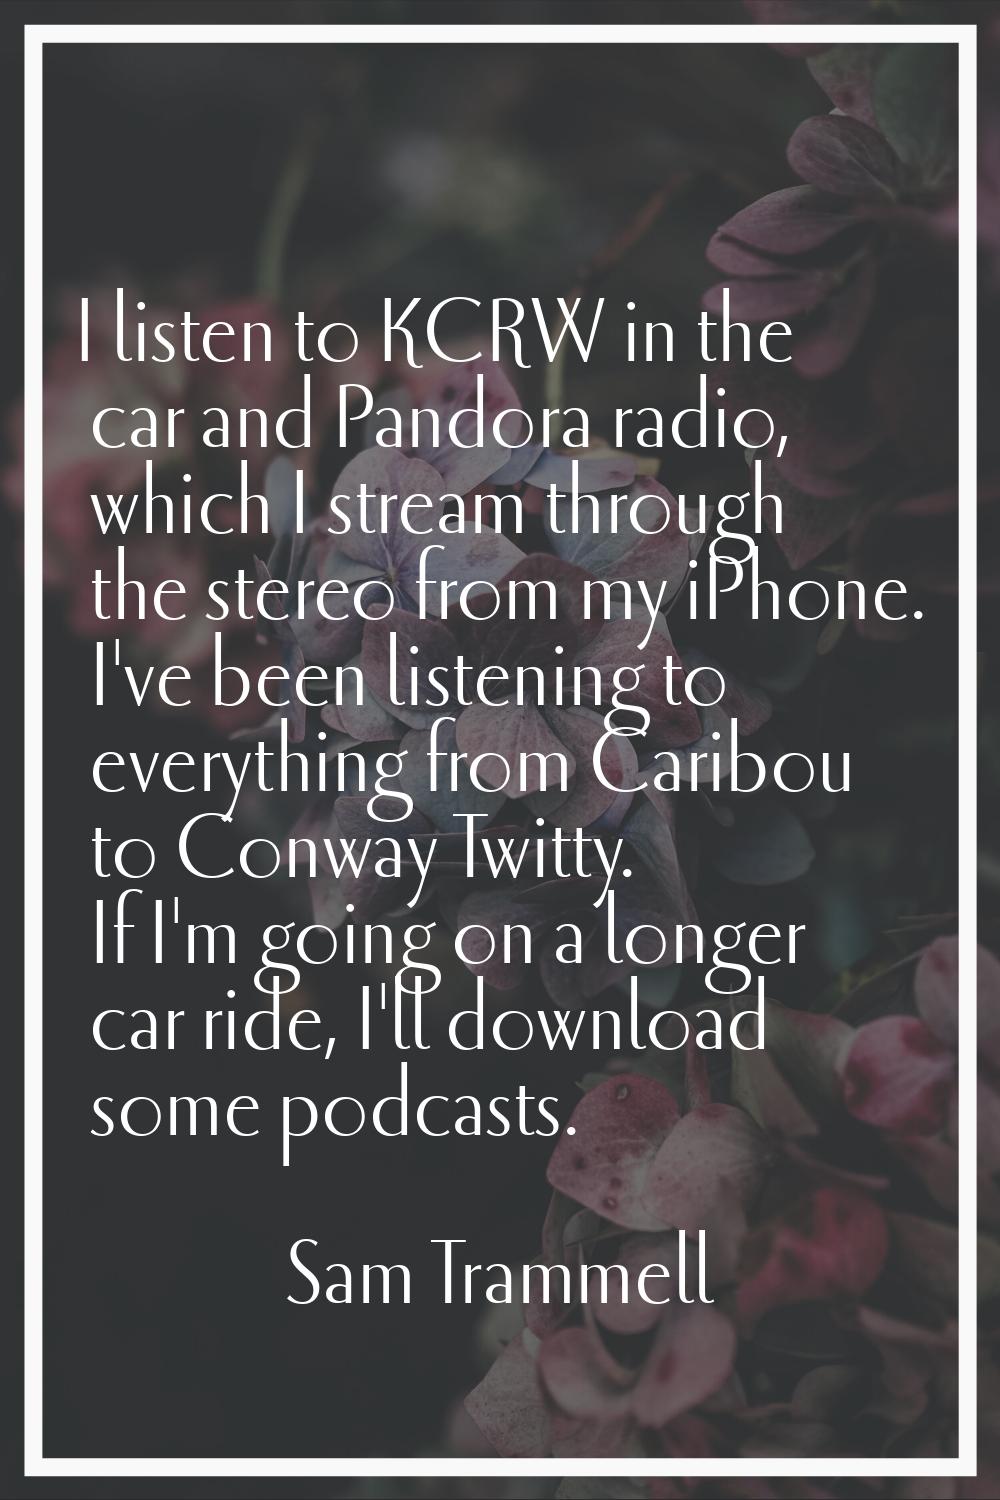 I listen to KCRW in the car and Pandora radio, which I stream through the stereo from my iPhone. I'